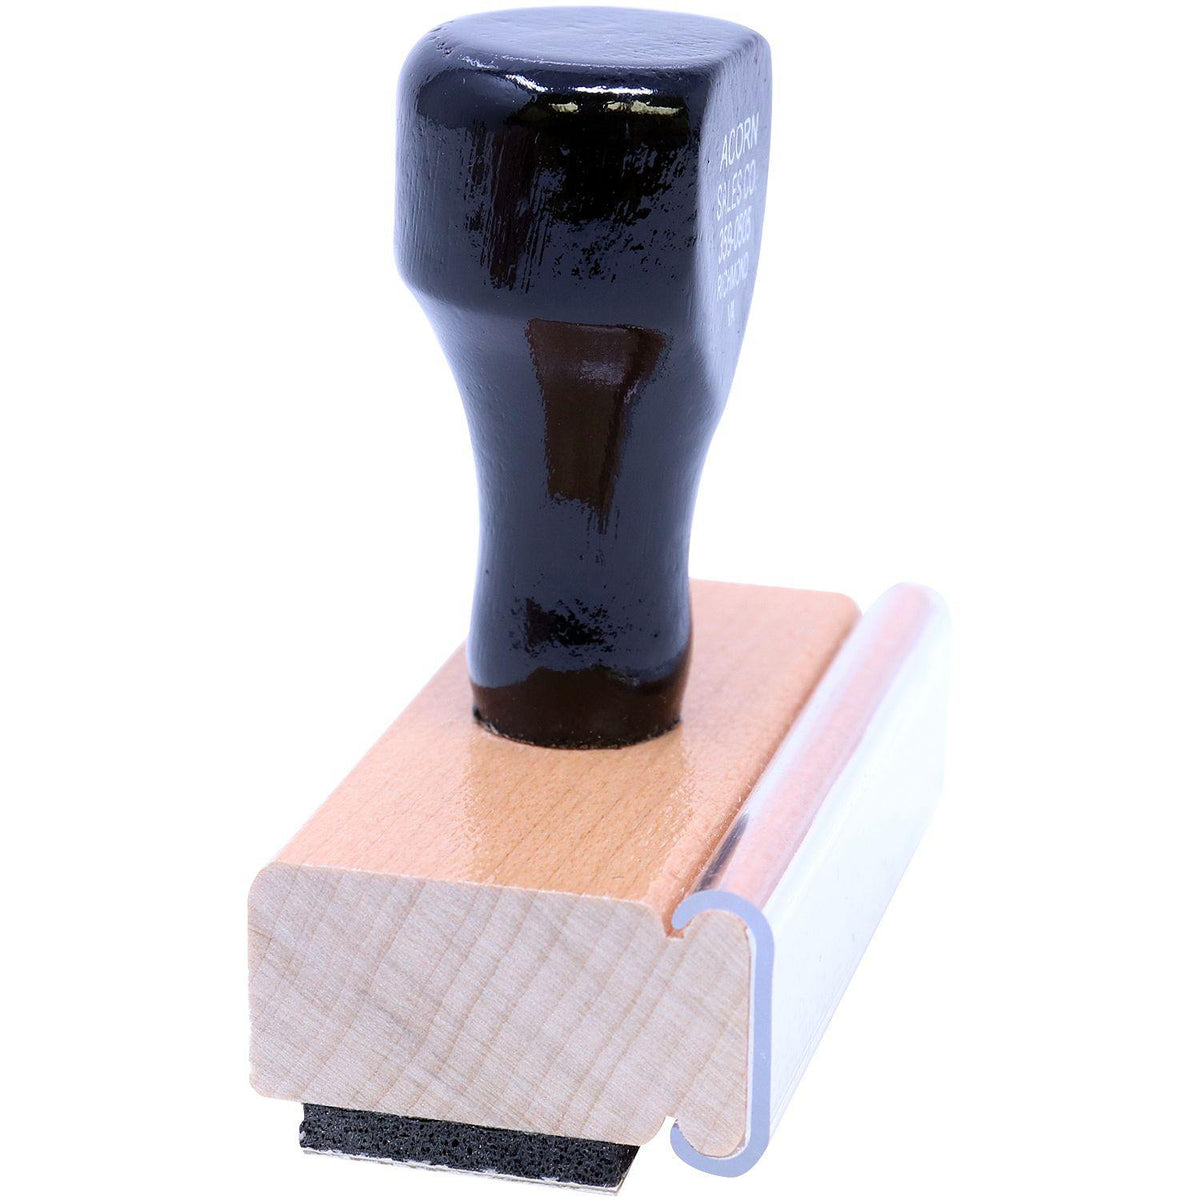 Large Standard Mail Stacked Rubber Stamp - Engineer Seal Stamps - Brand_Acorn, Impression Size_Large, Stamp Type_Regular Stamp, Type of Use_Postal &amp; Mailing